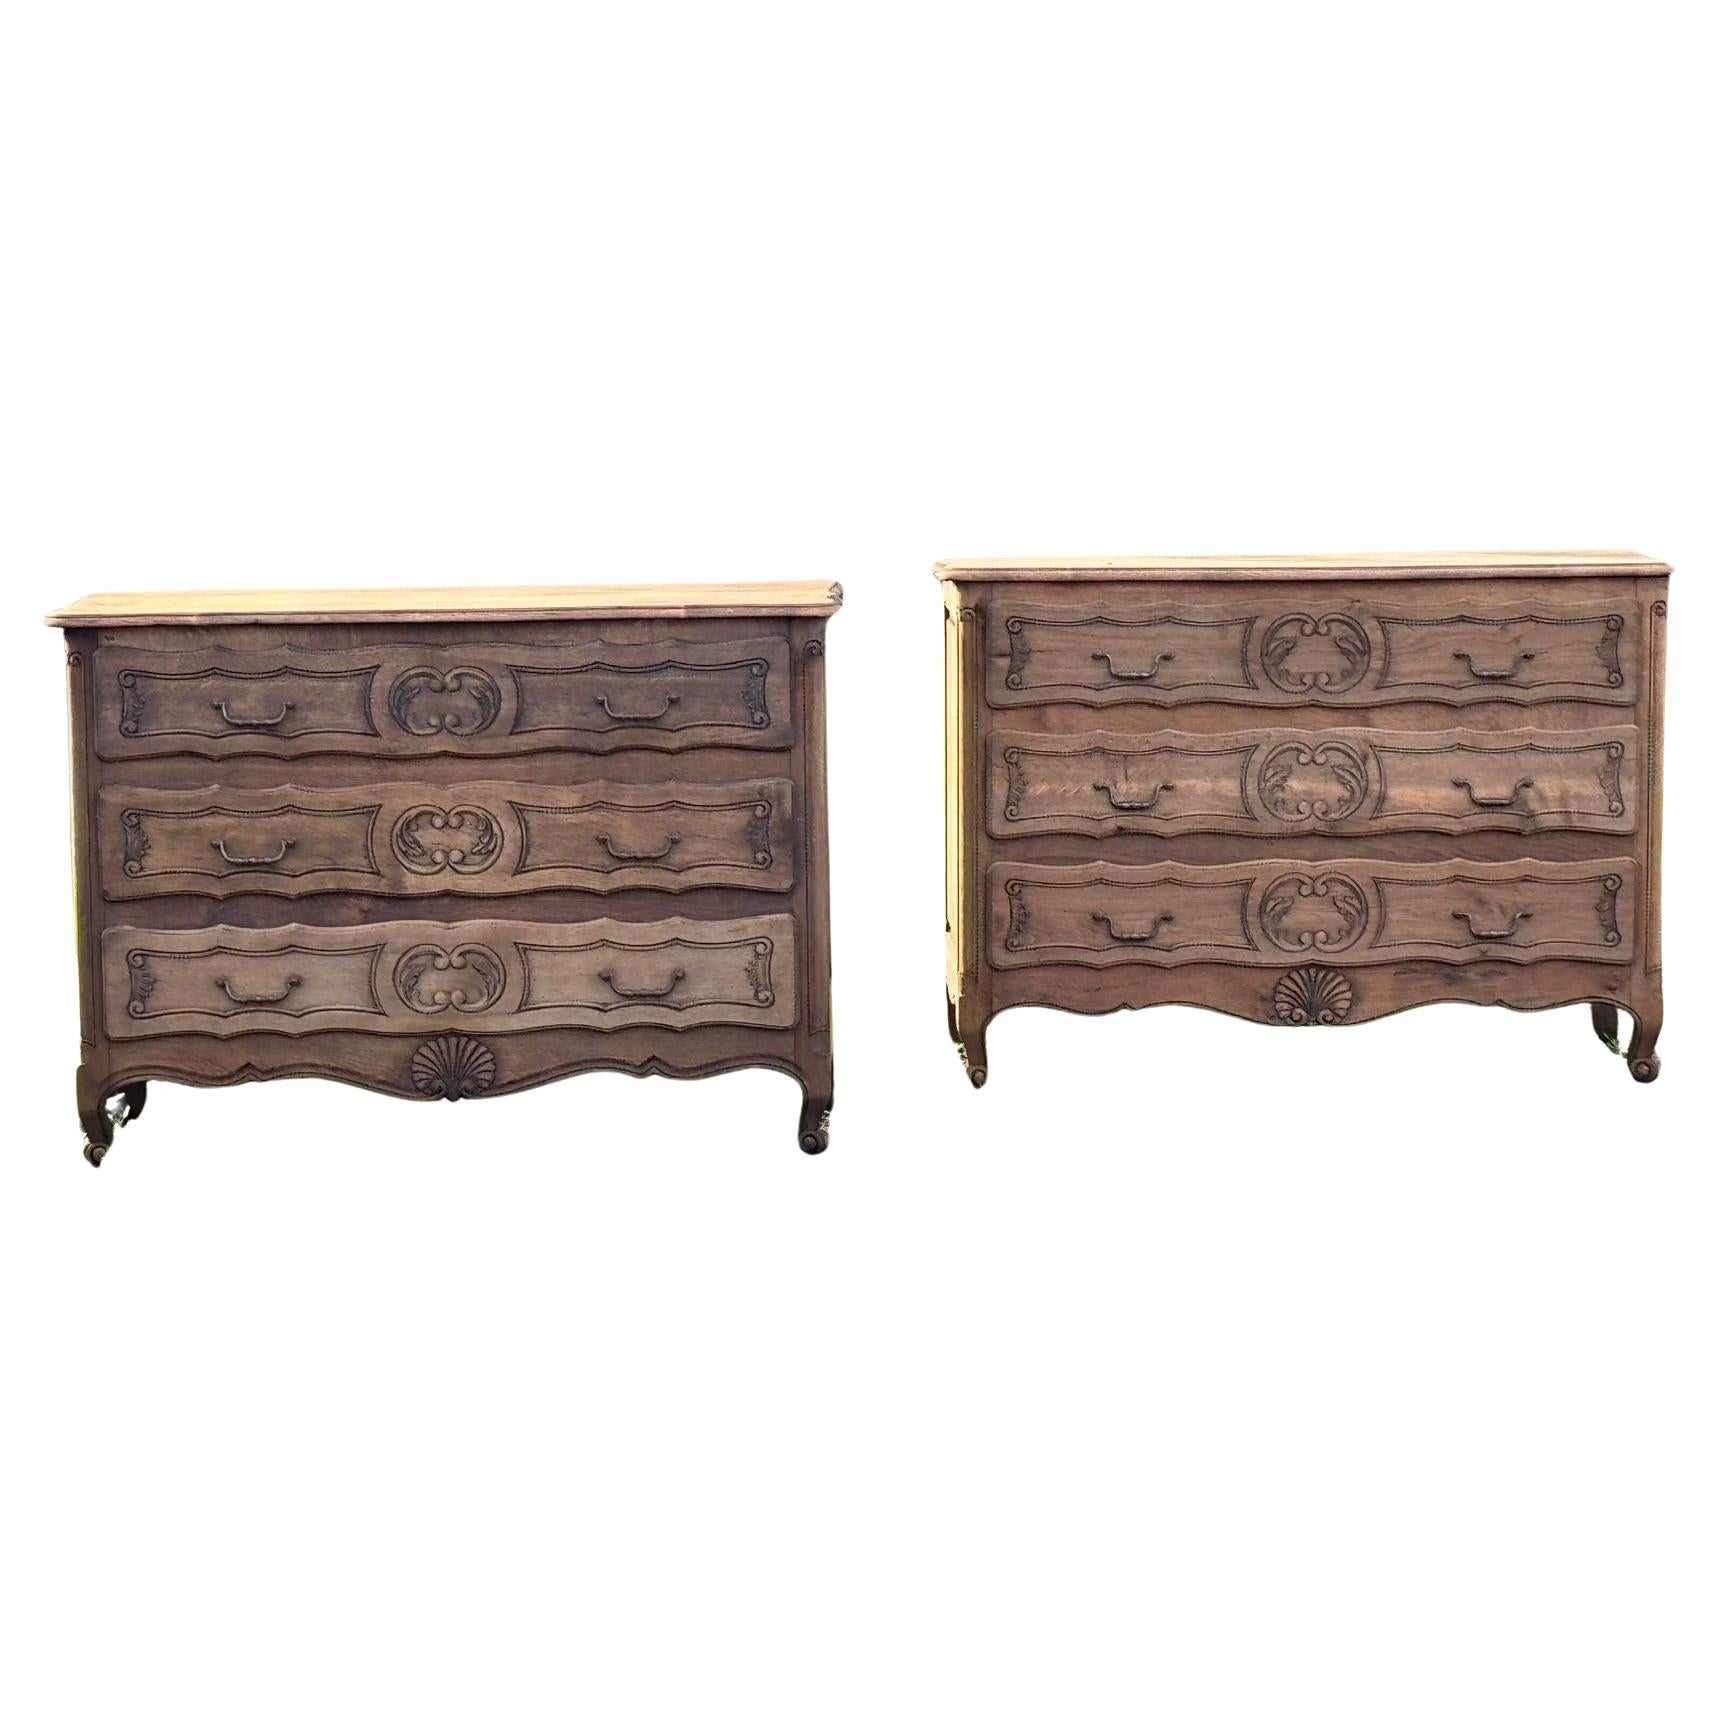 Very Rare Pair of French Bleached Oak Chests of Drawers